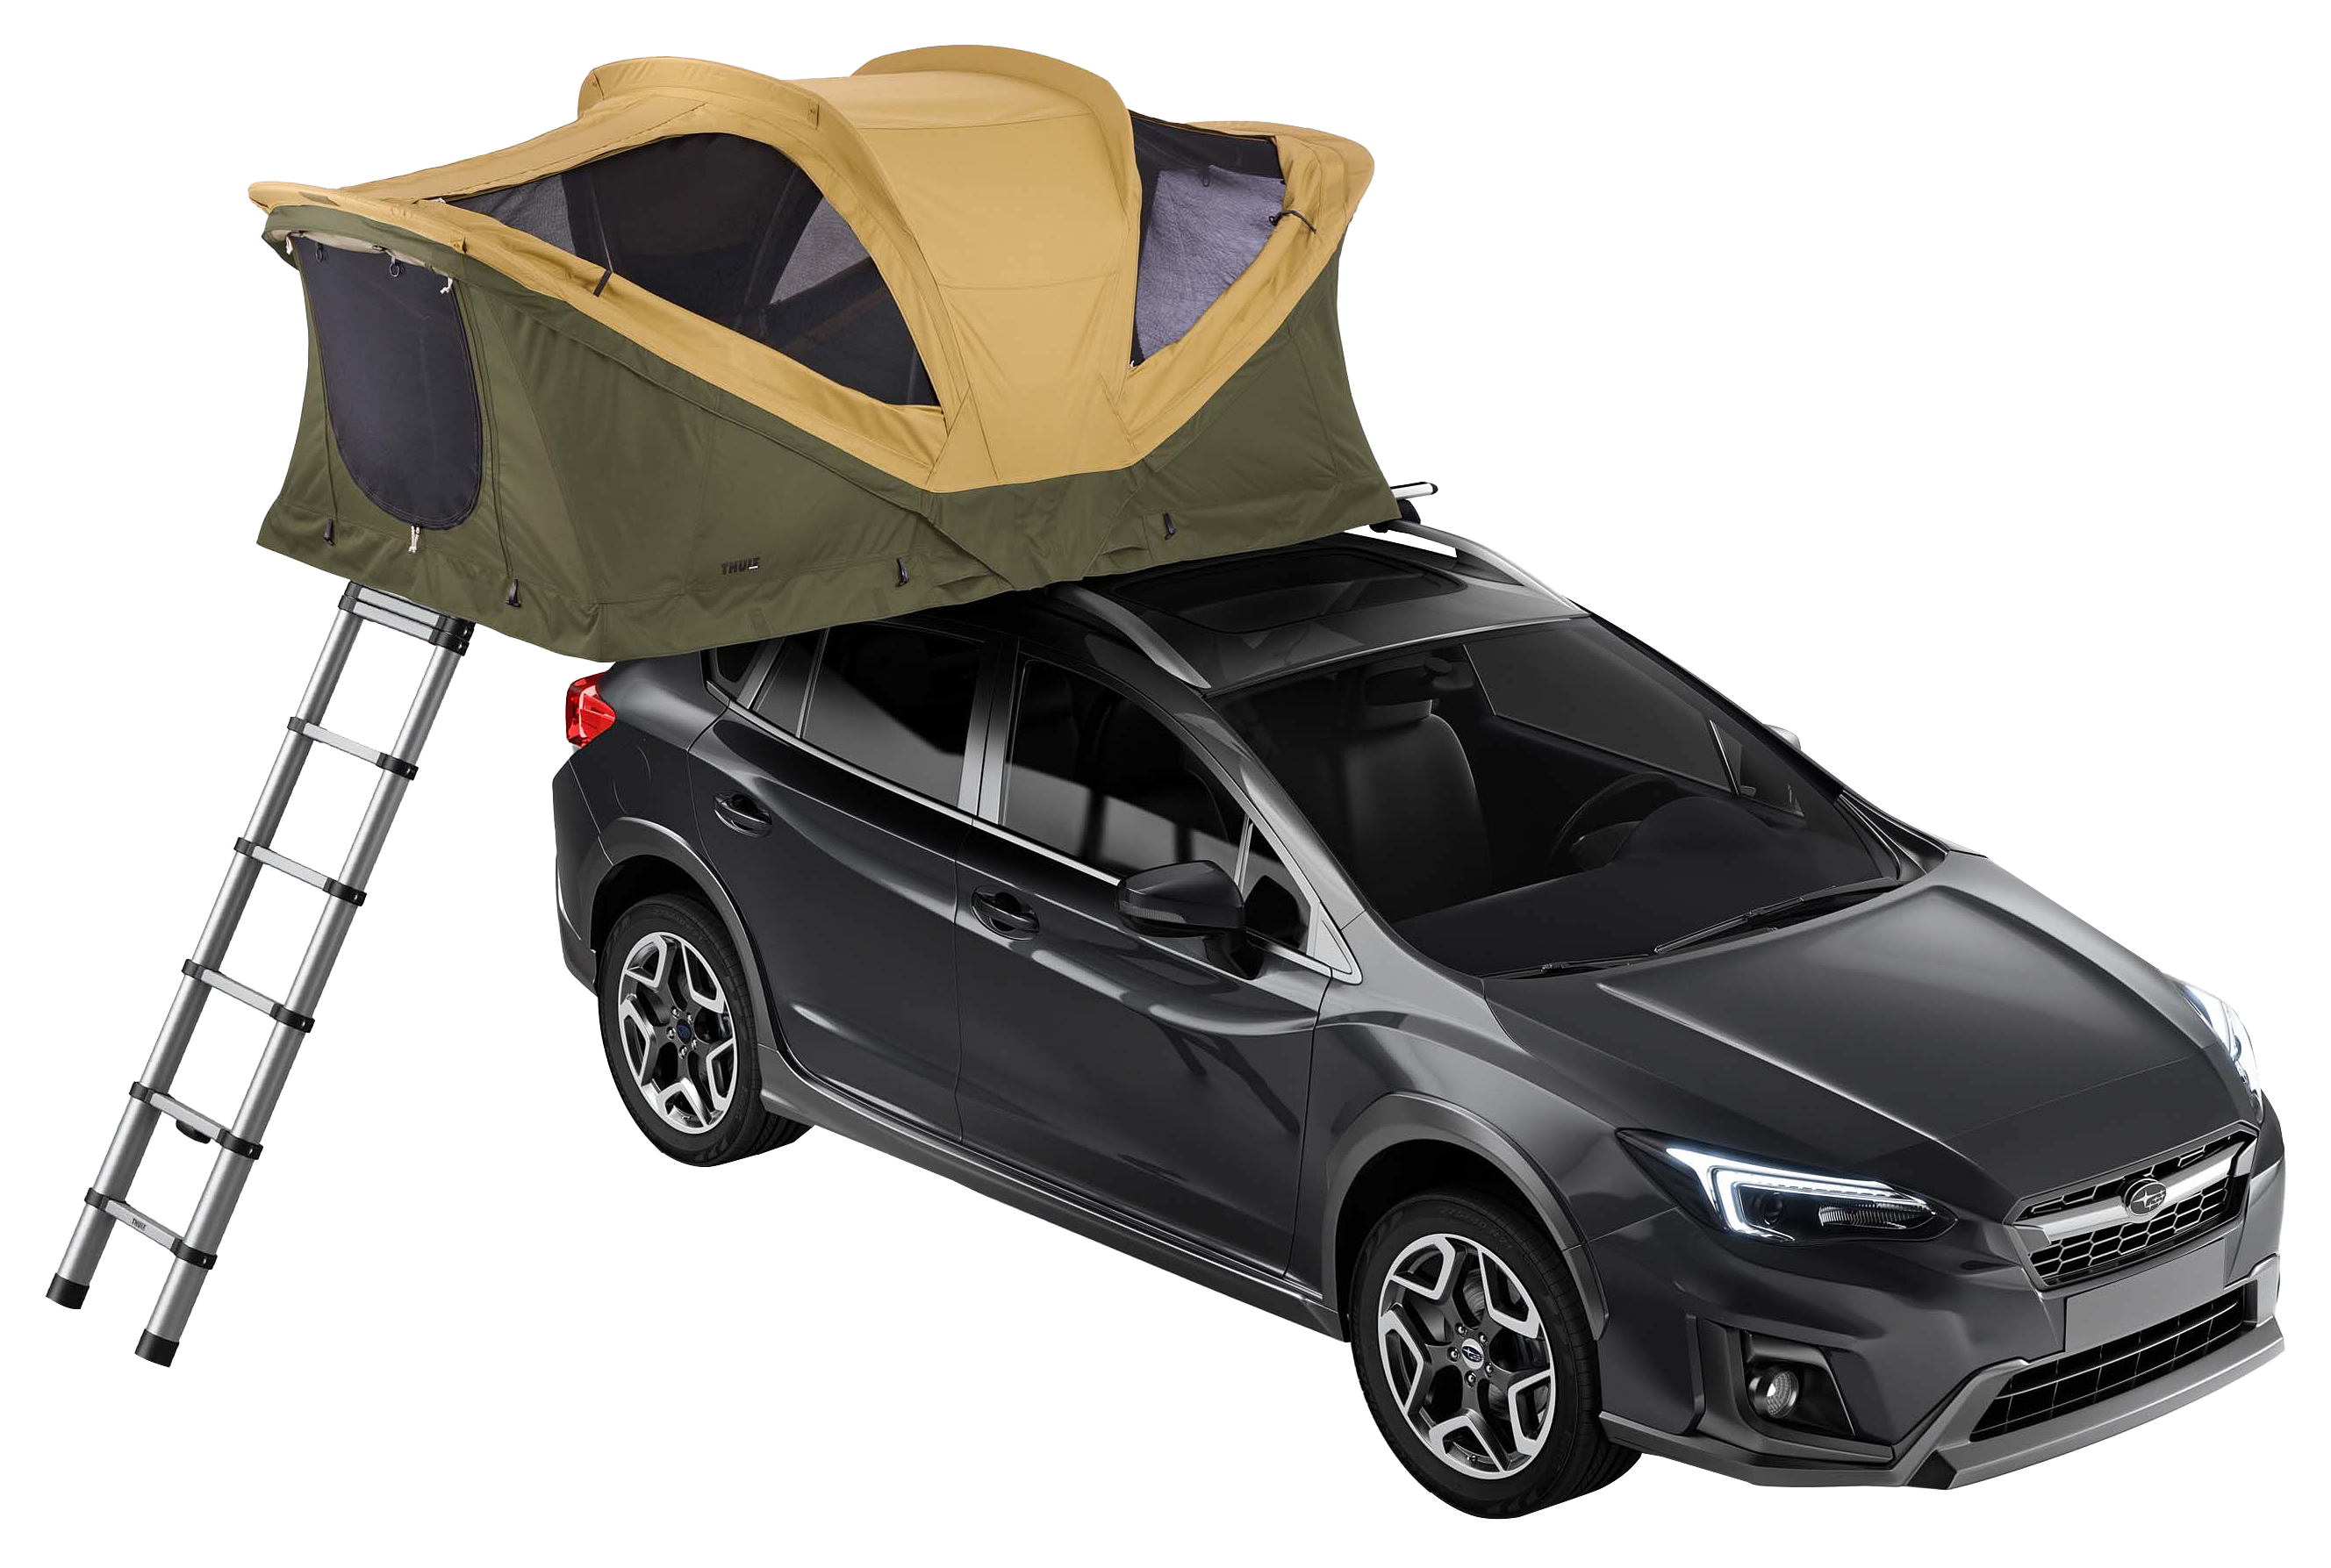 Thule Approach S 2-Person Rooftop Tent - Fennel Tan